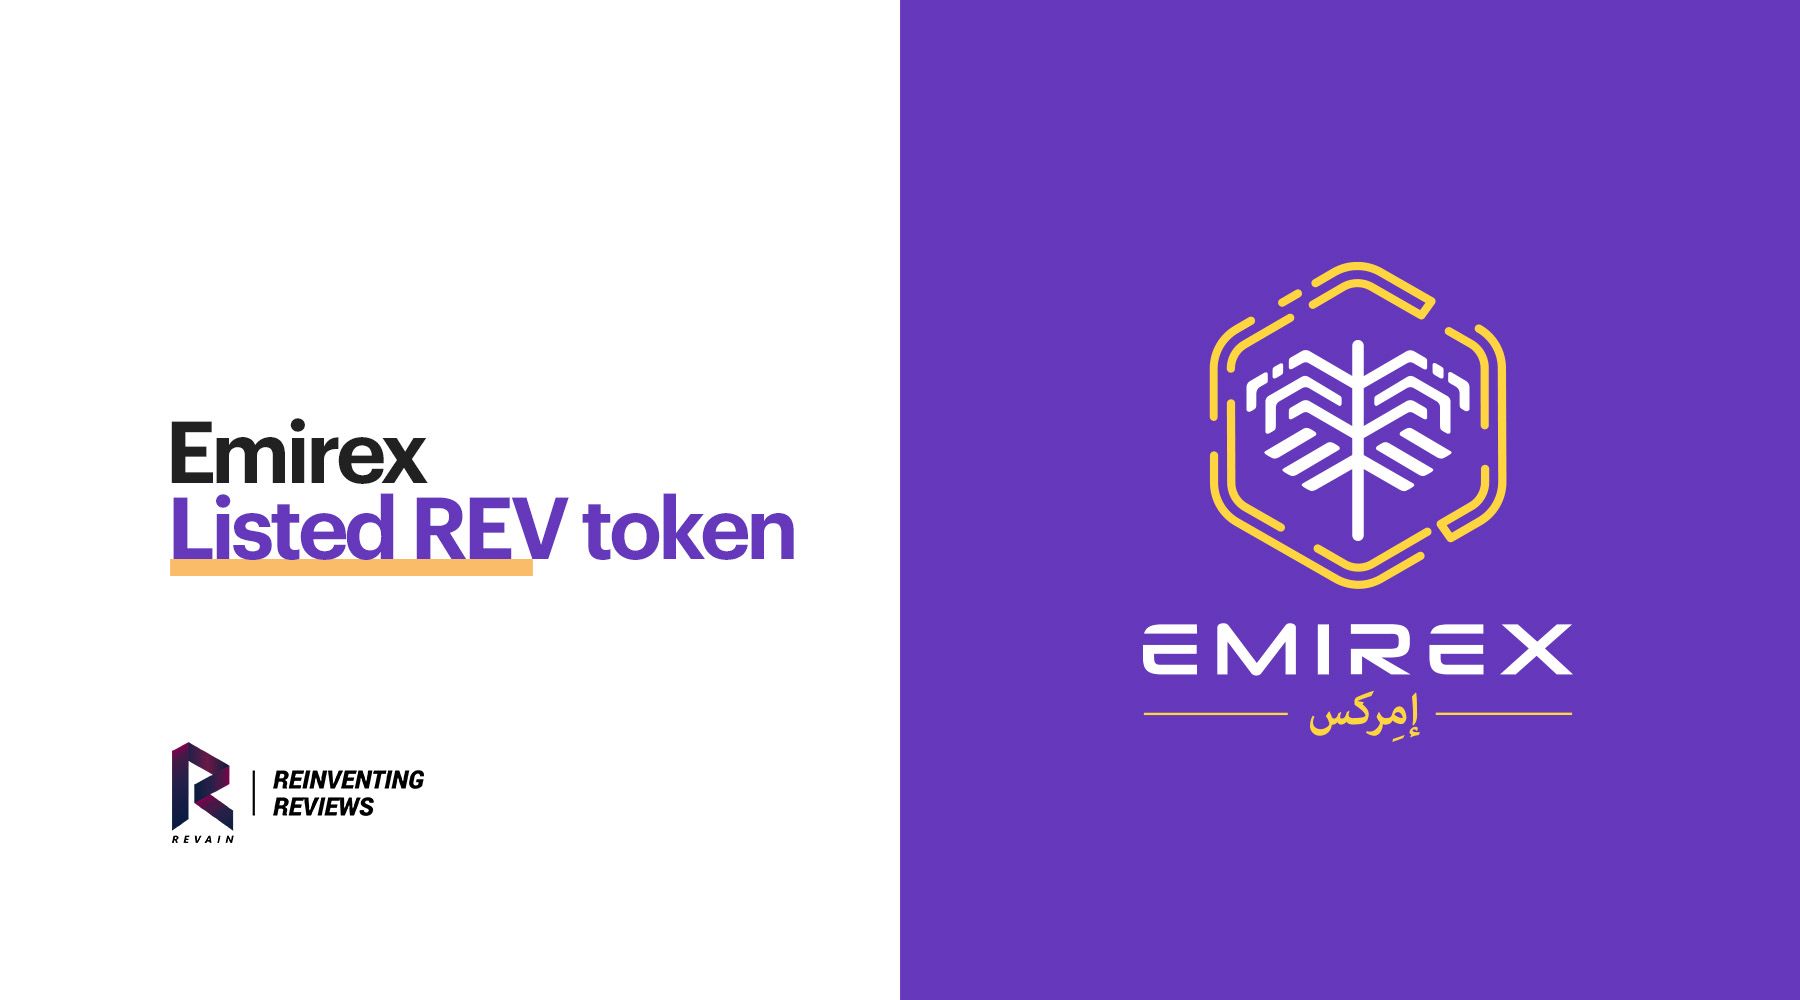 Revain is listed on the Emirex exchange 